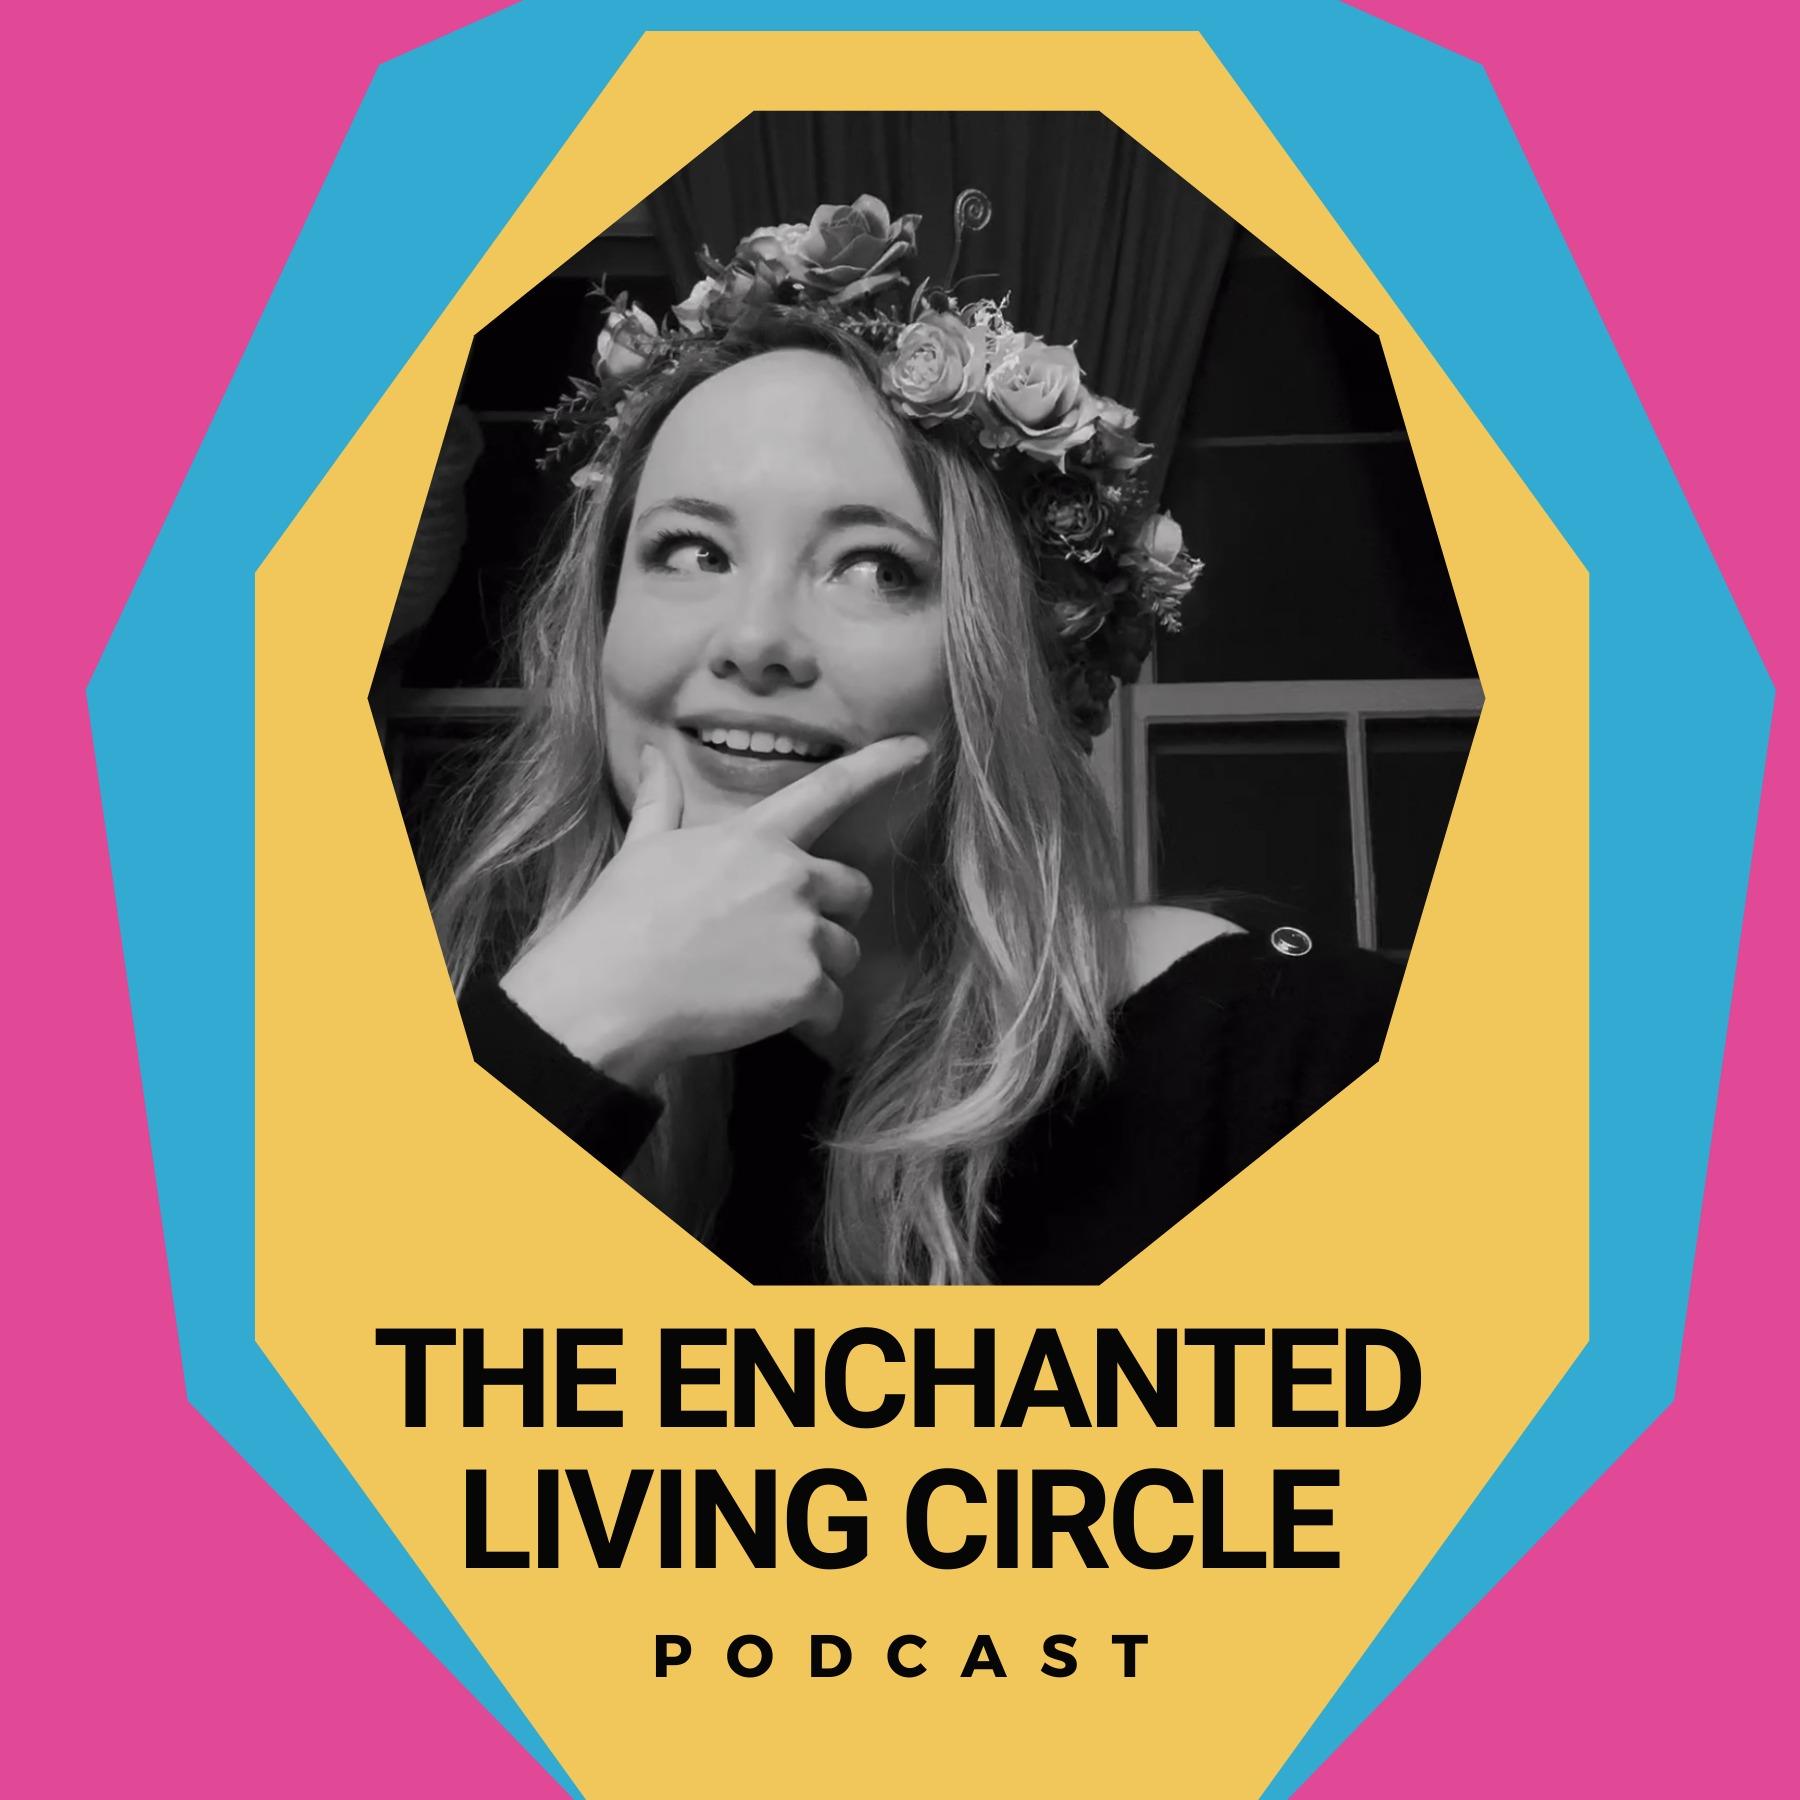 The Enchanted Living Circle Podcast